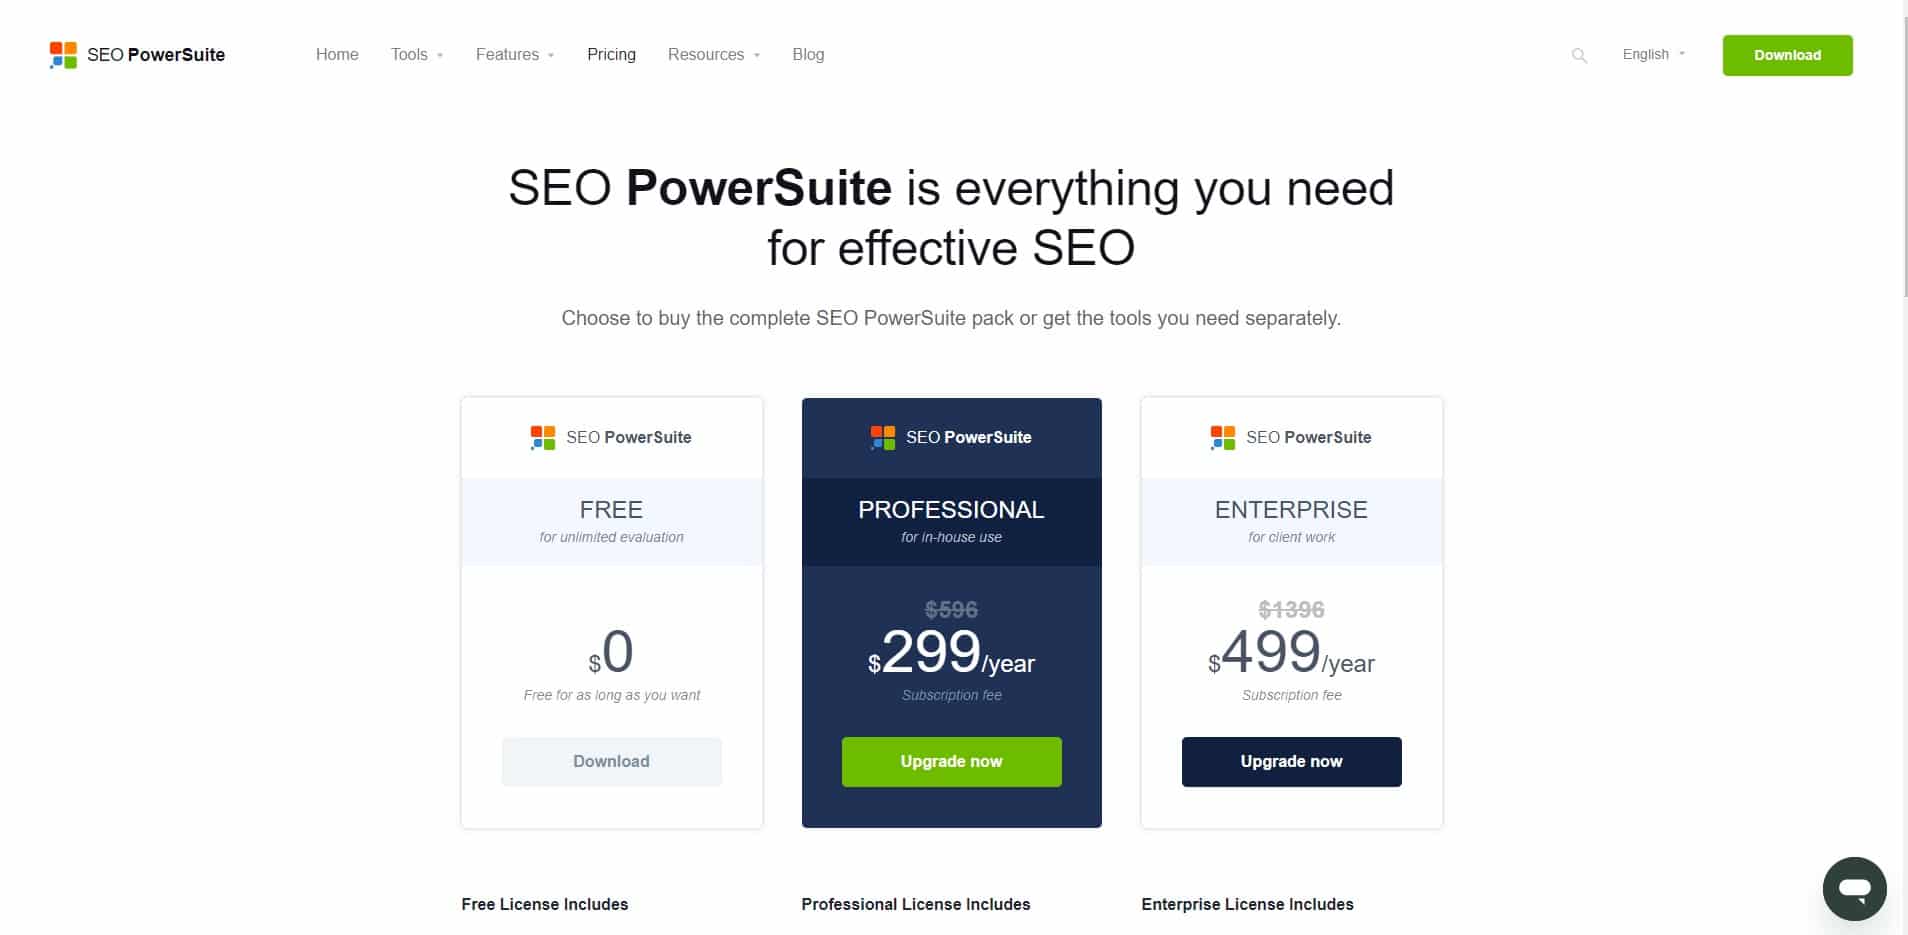 SEO PowerSuite is affordable desktop competitor and alternative to Ubersuggest